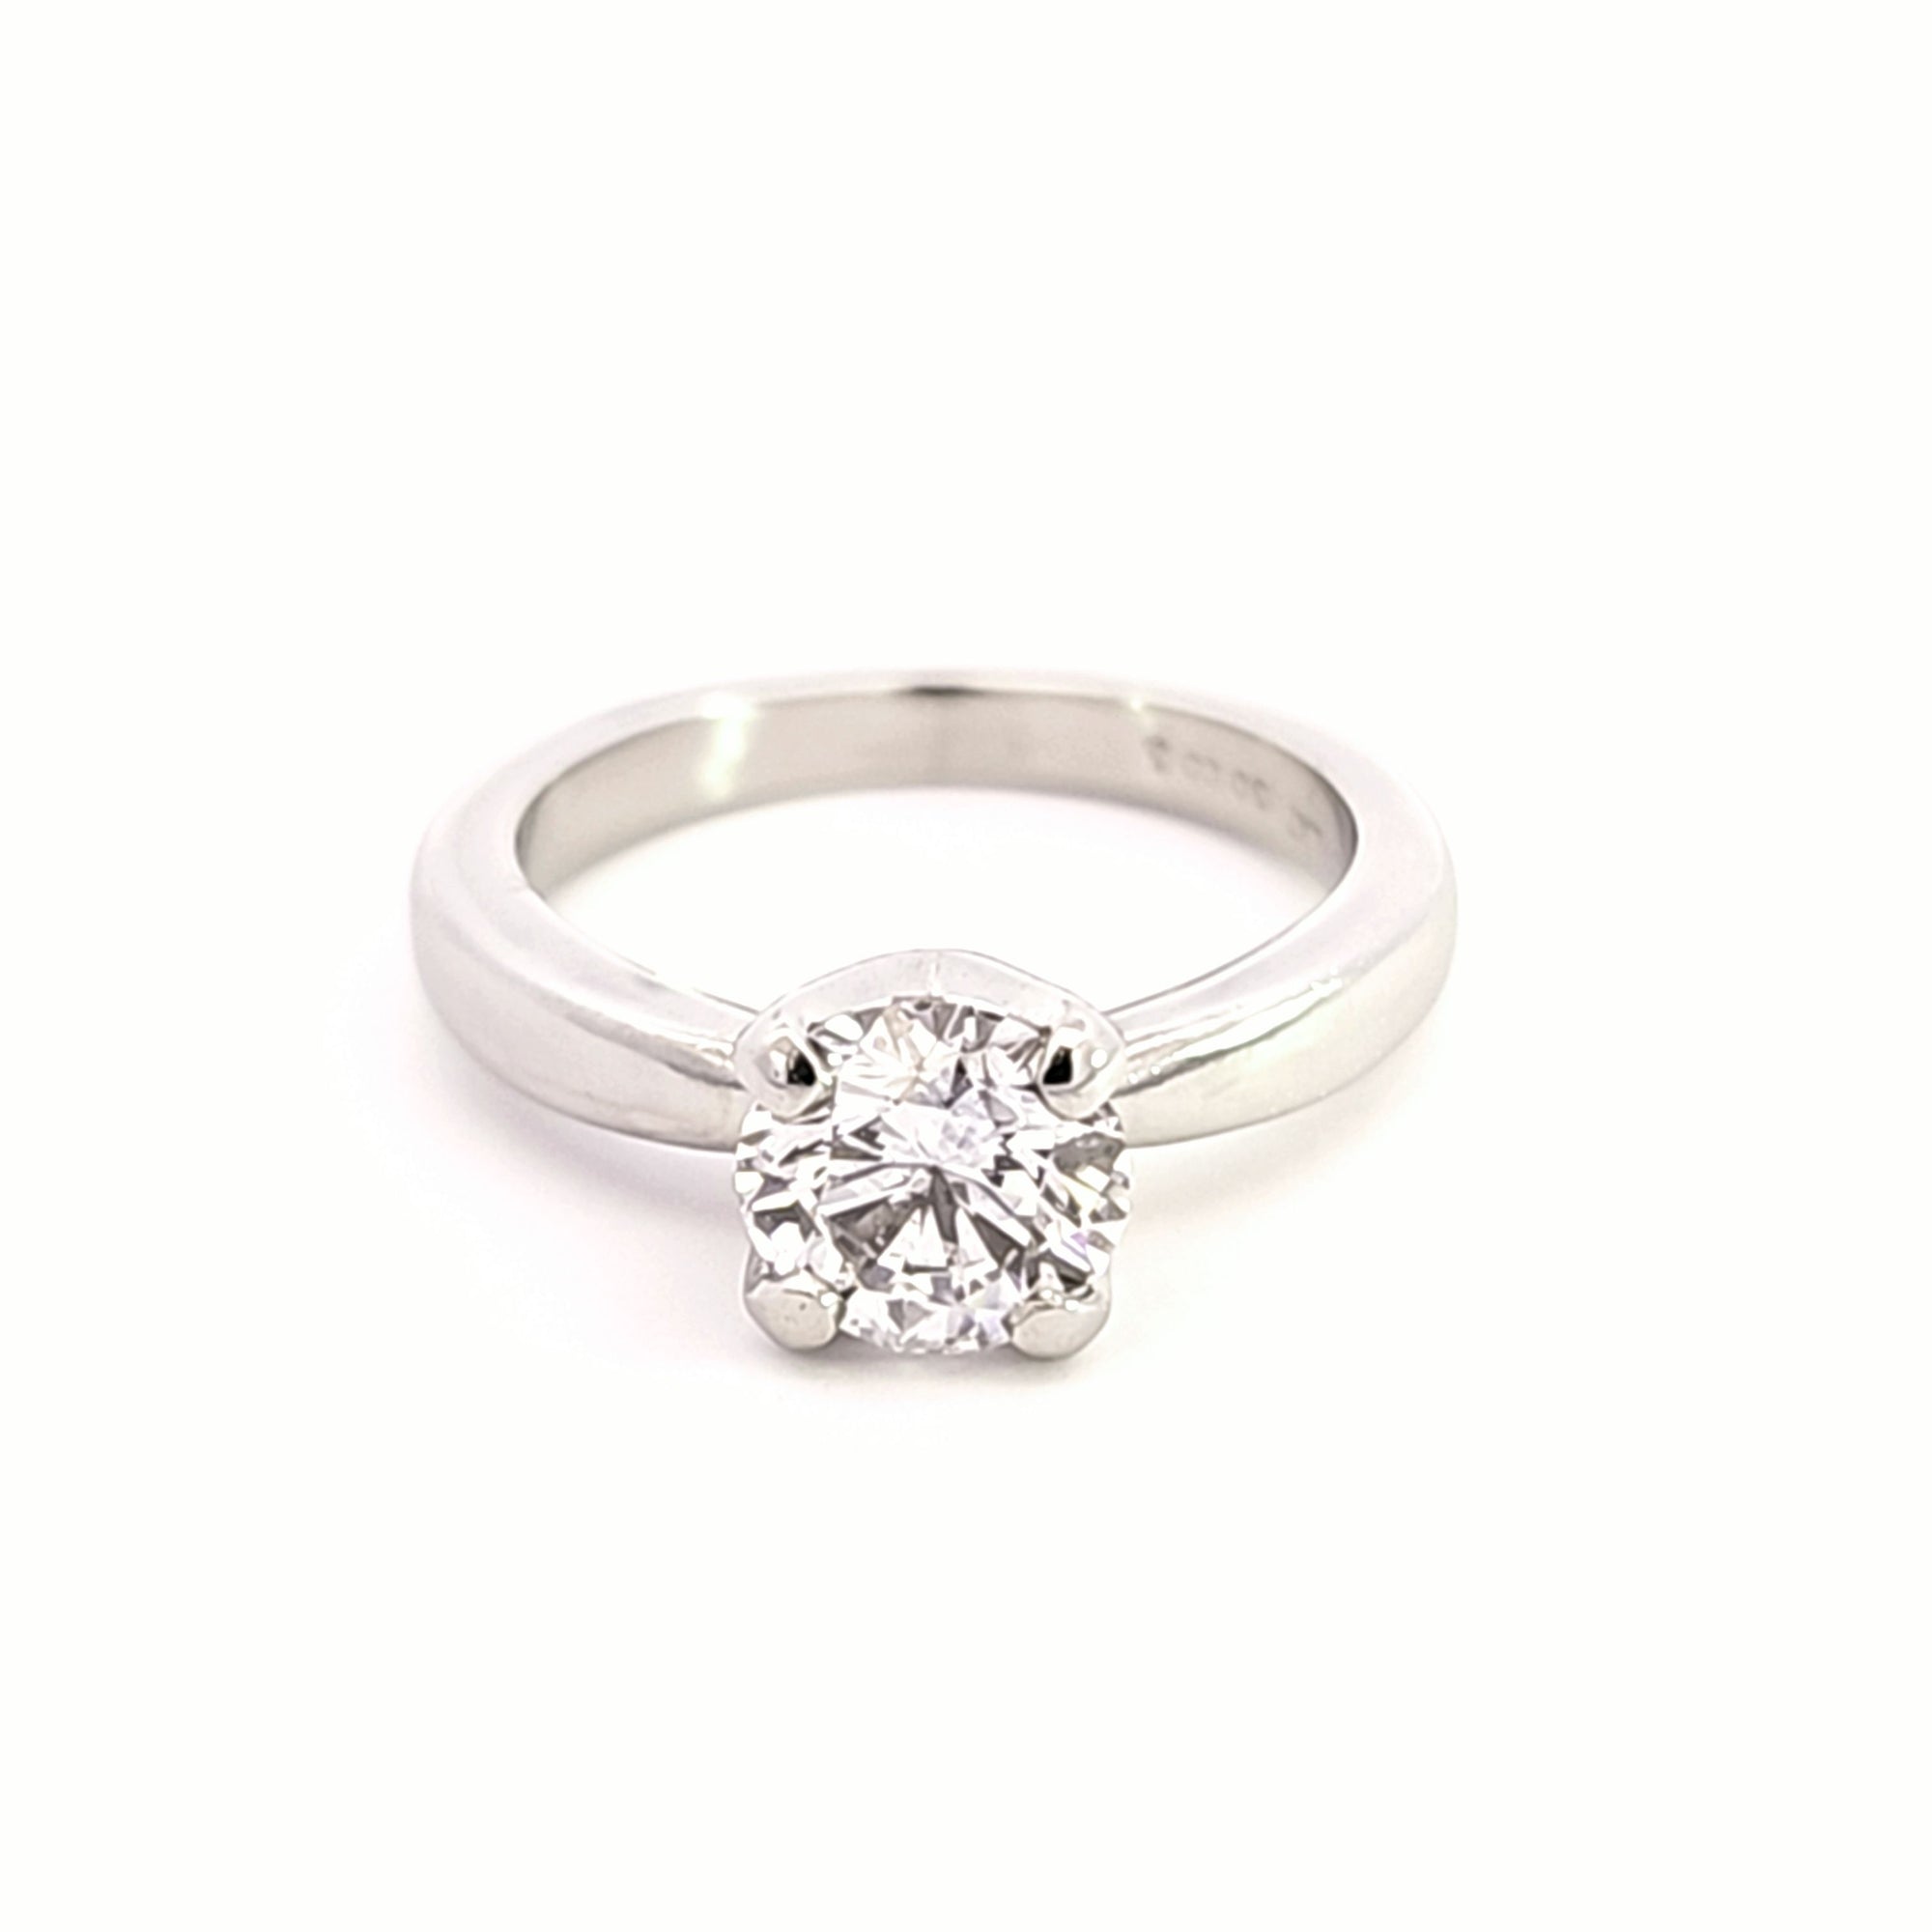 Solitaire Canadian Diamond Engagement Ring | 1.09ct | SZ 5.25 |